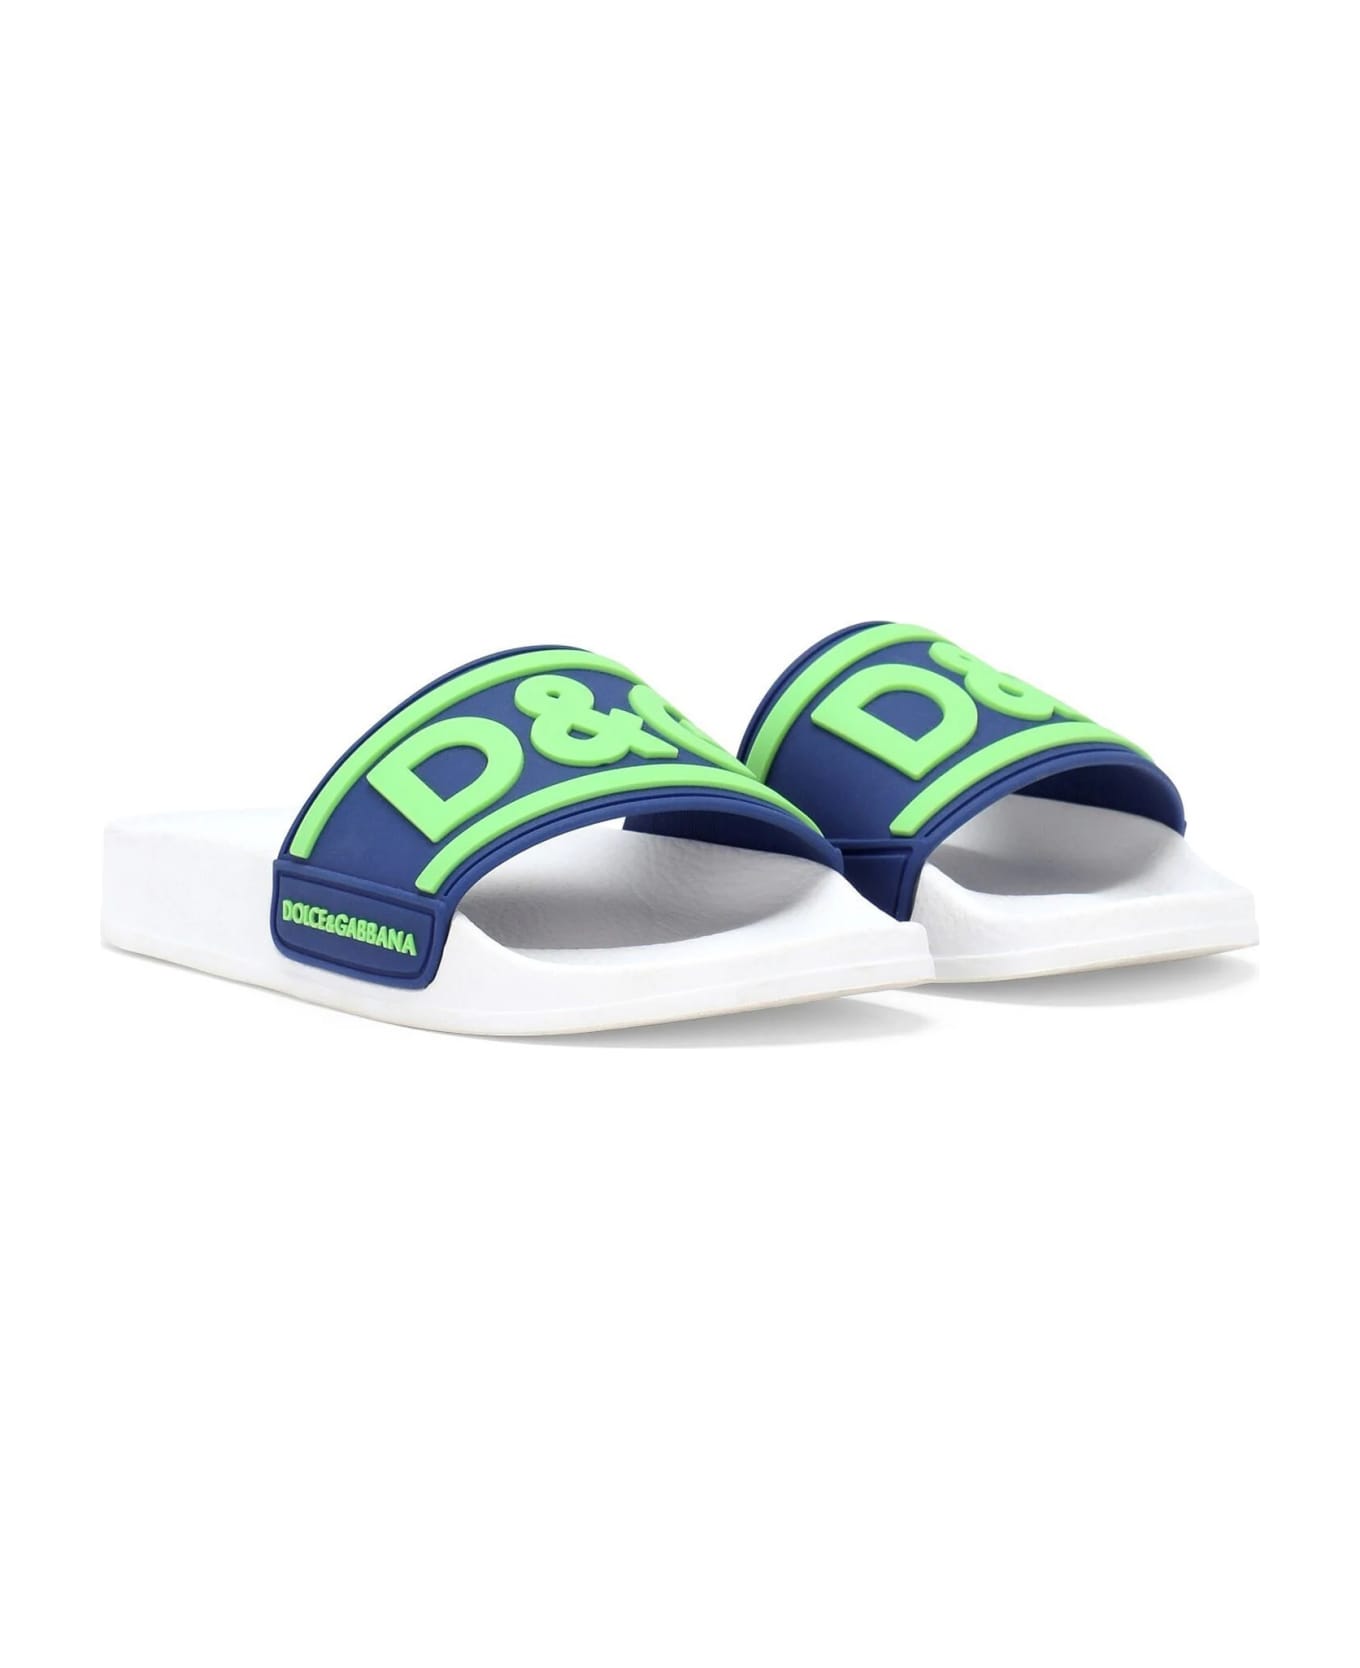 Dolce & Gabbana Blue And White Slippers With Fluo D&g Logo - Blue